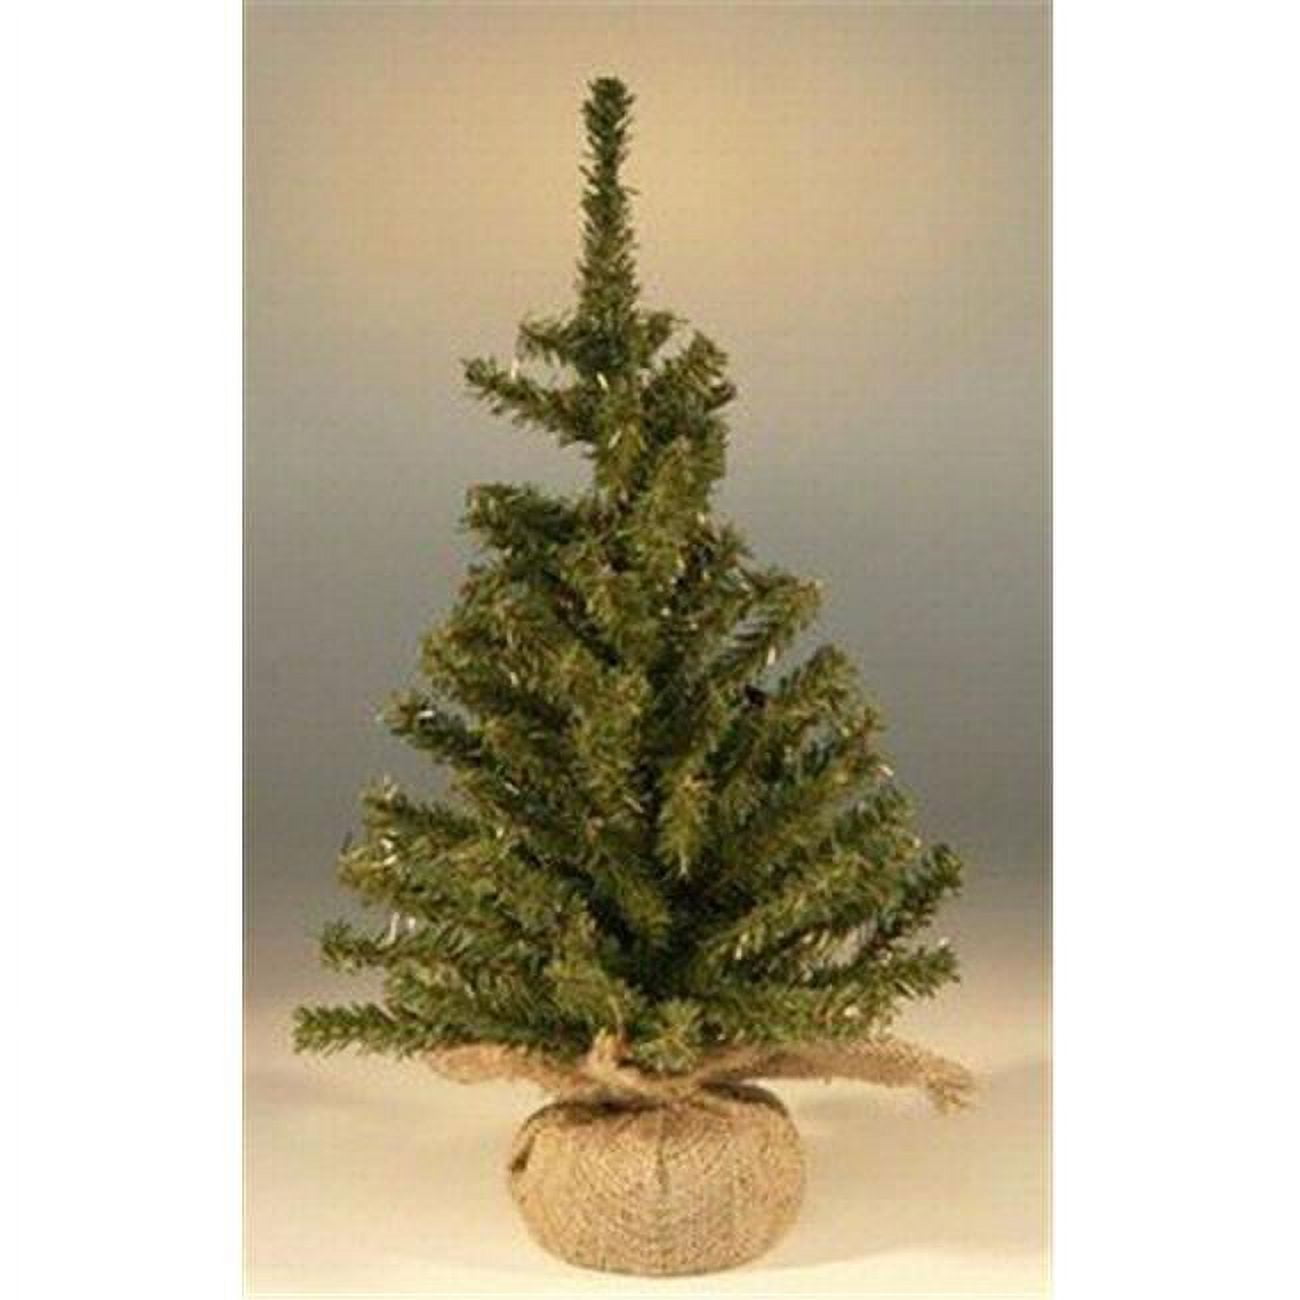 Picture of Bonsai Boy e1426 15 in. Artificial Christmas Bonsai Tree - Undecorated